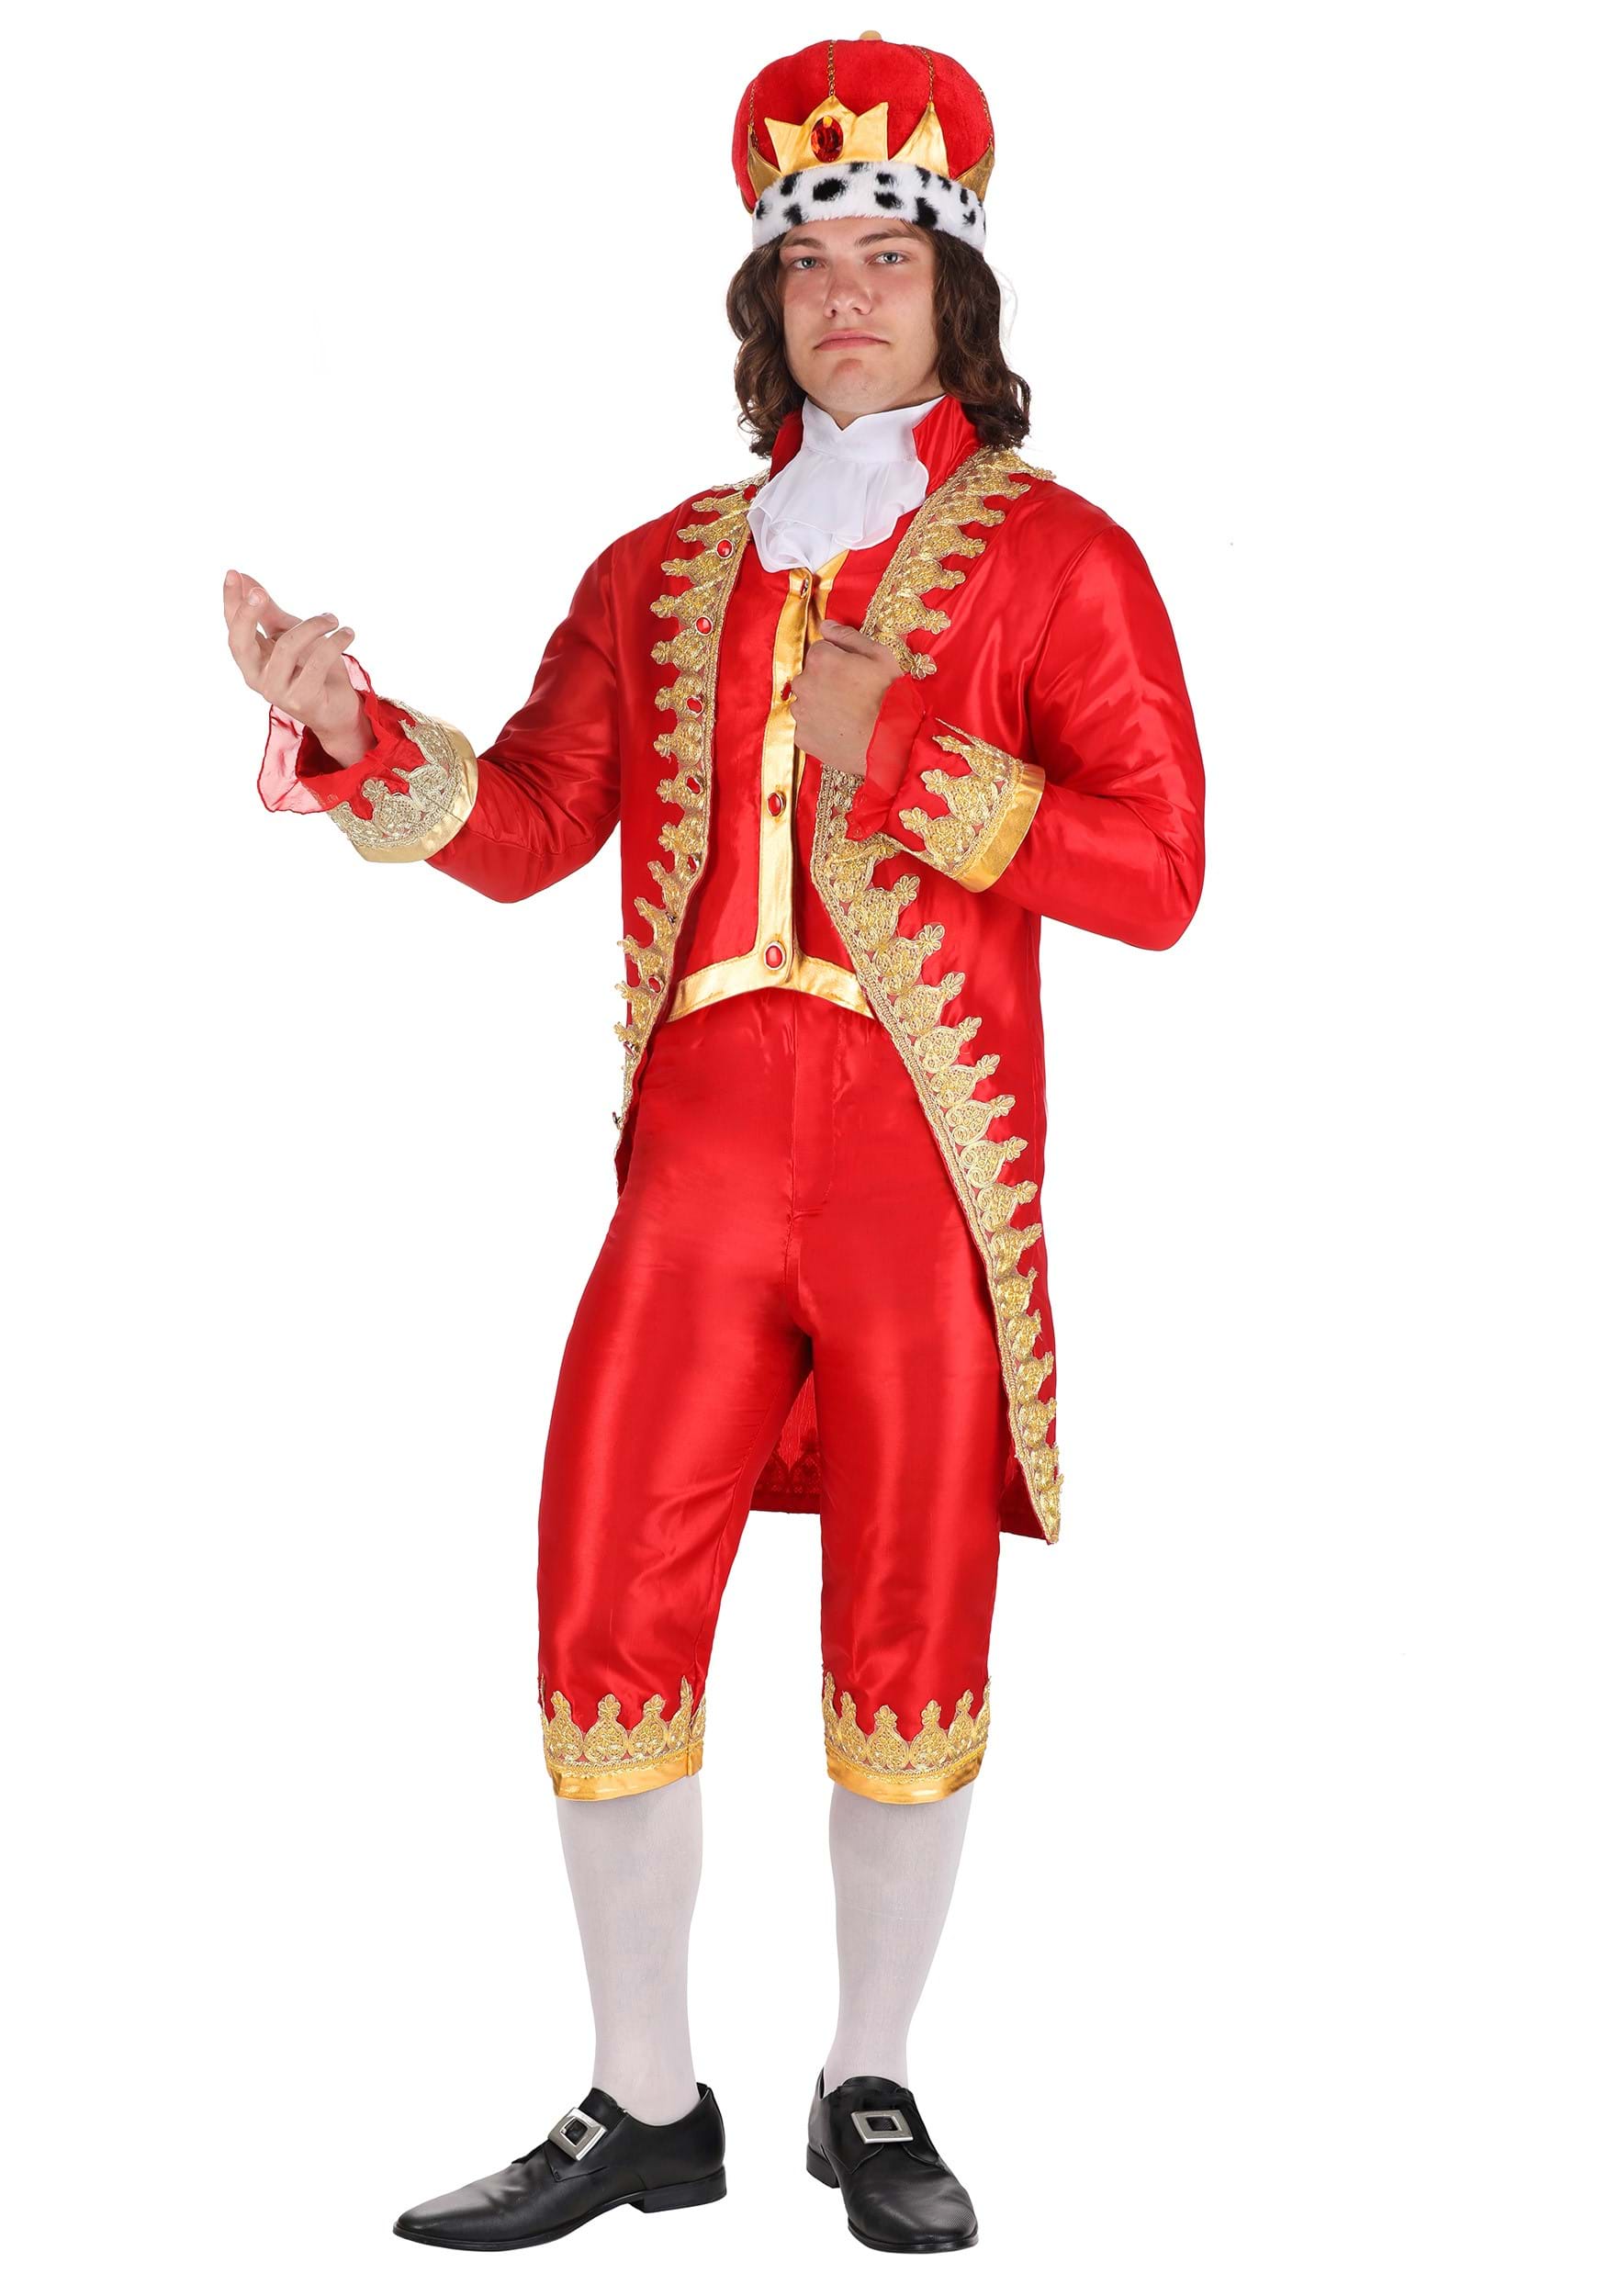 Image of Adult King George Costume | Men's Historical Costumes ID FUN6576AD-M